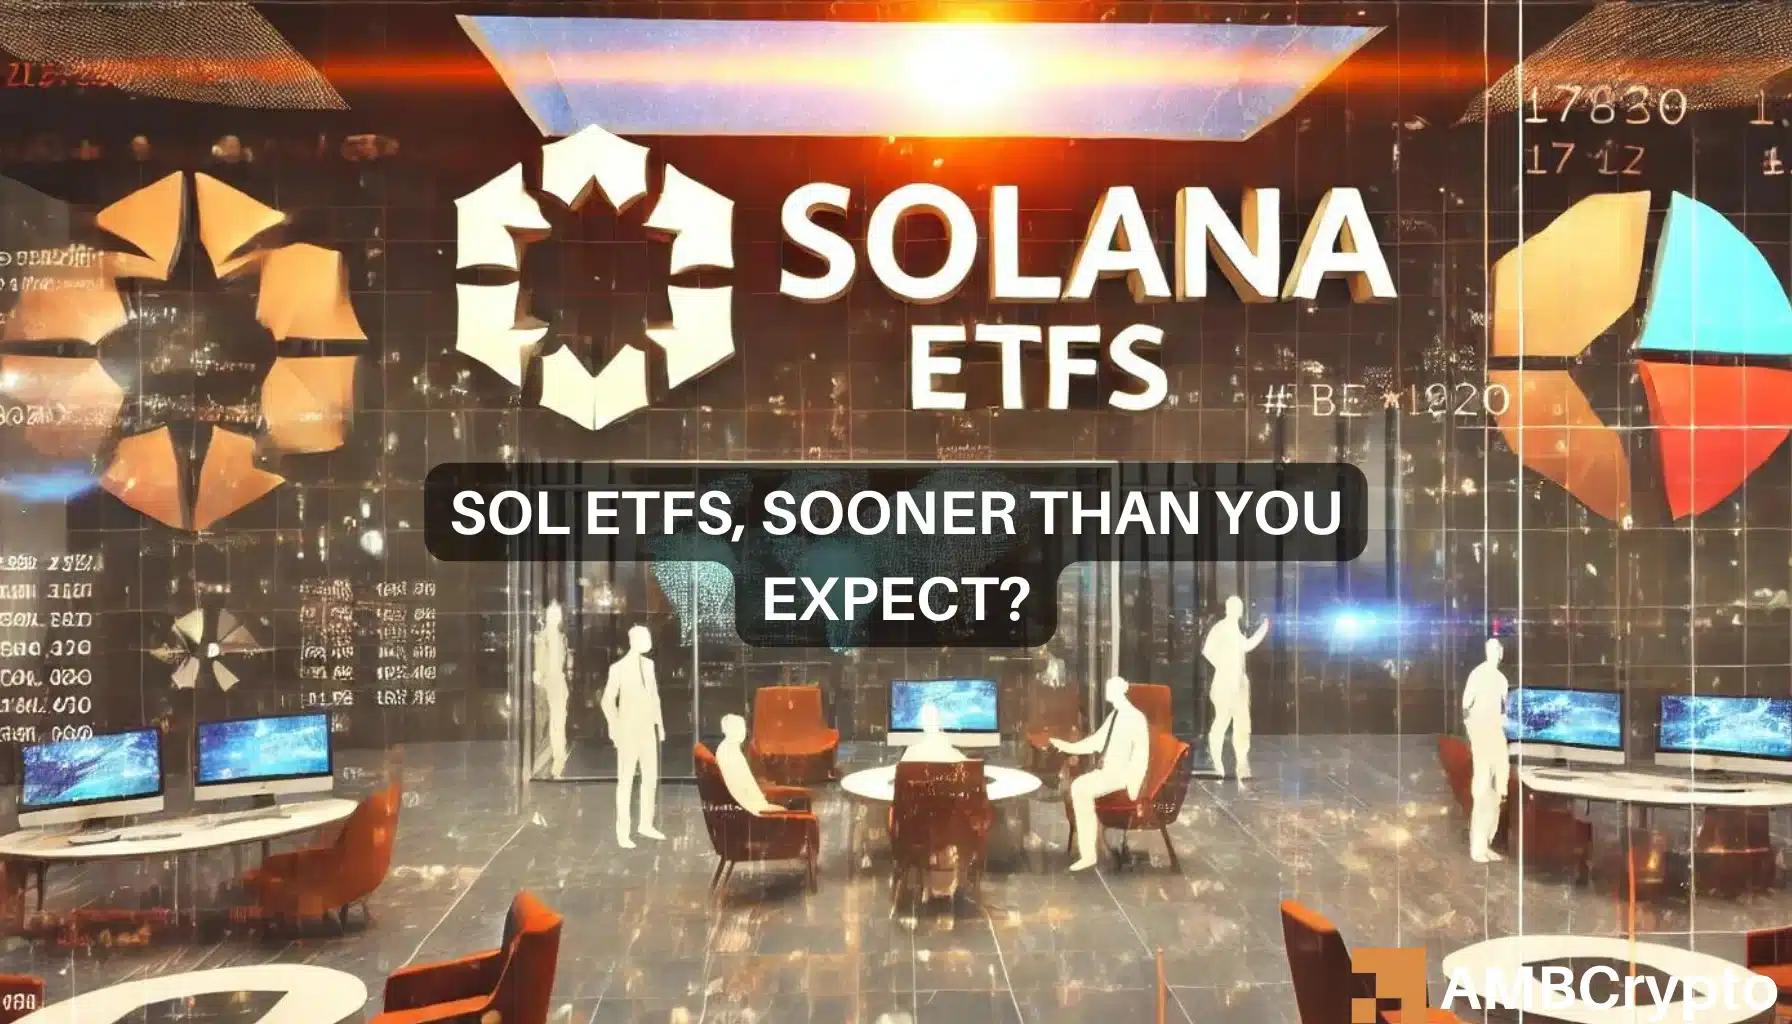 Spot Solana ETF approvals – Closer than you think?